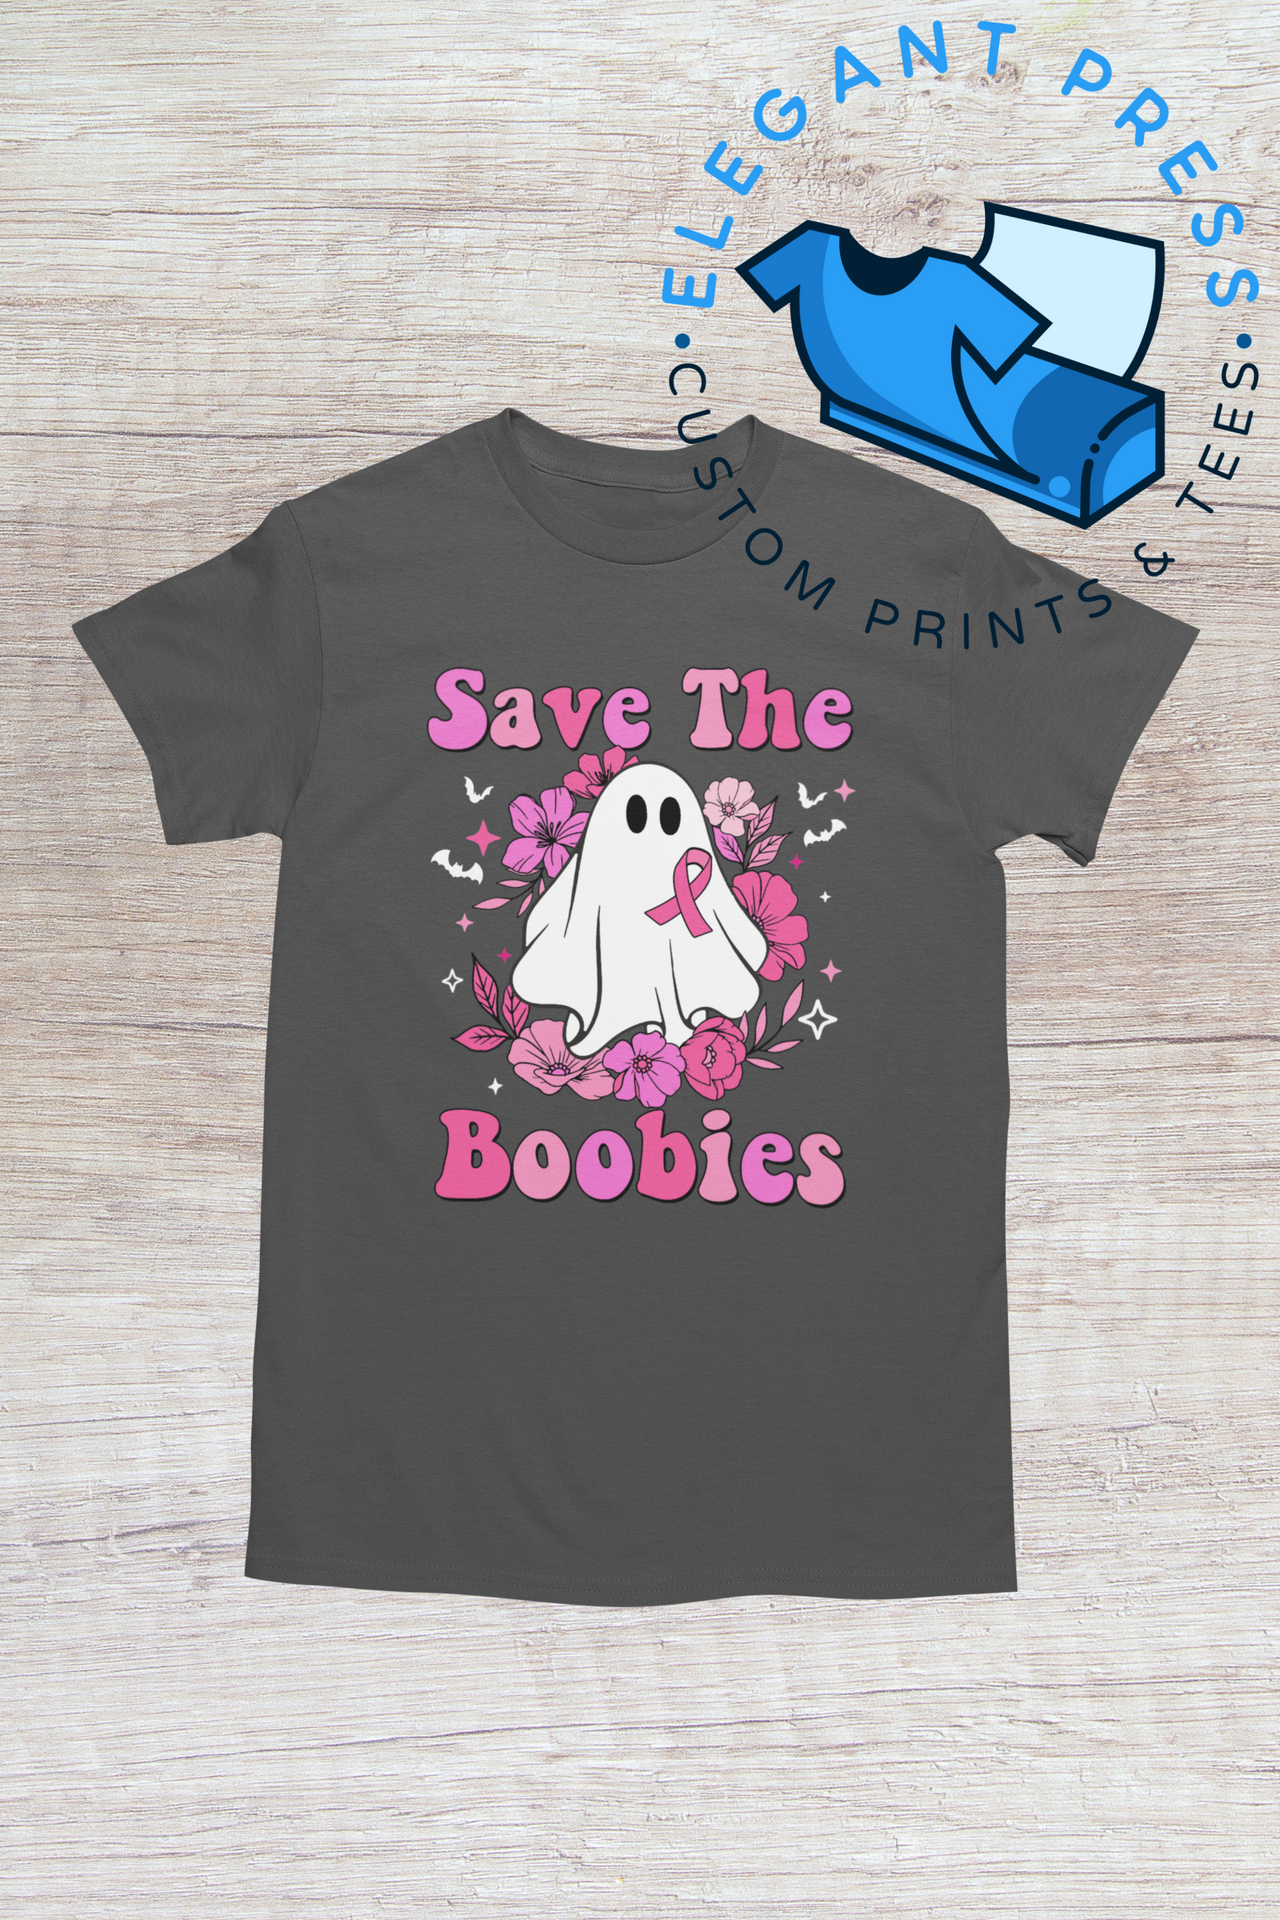 Save The Boobies (Breast Cancer Awareness) Tee